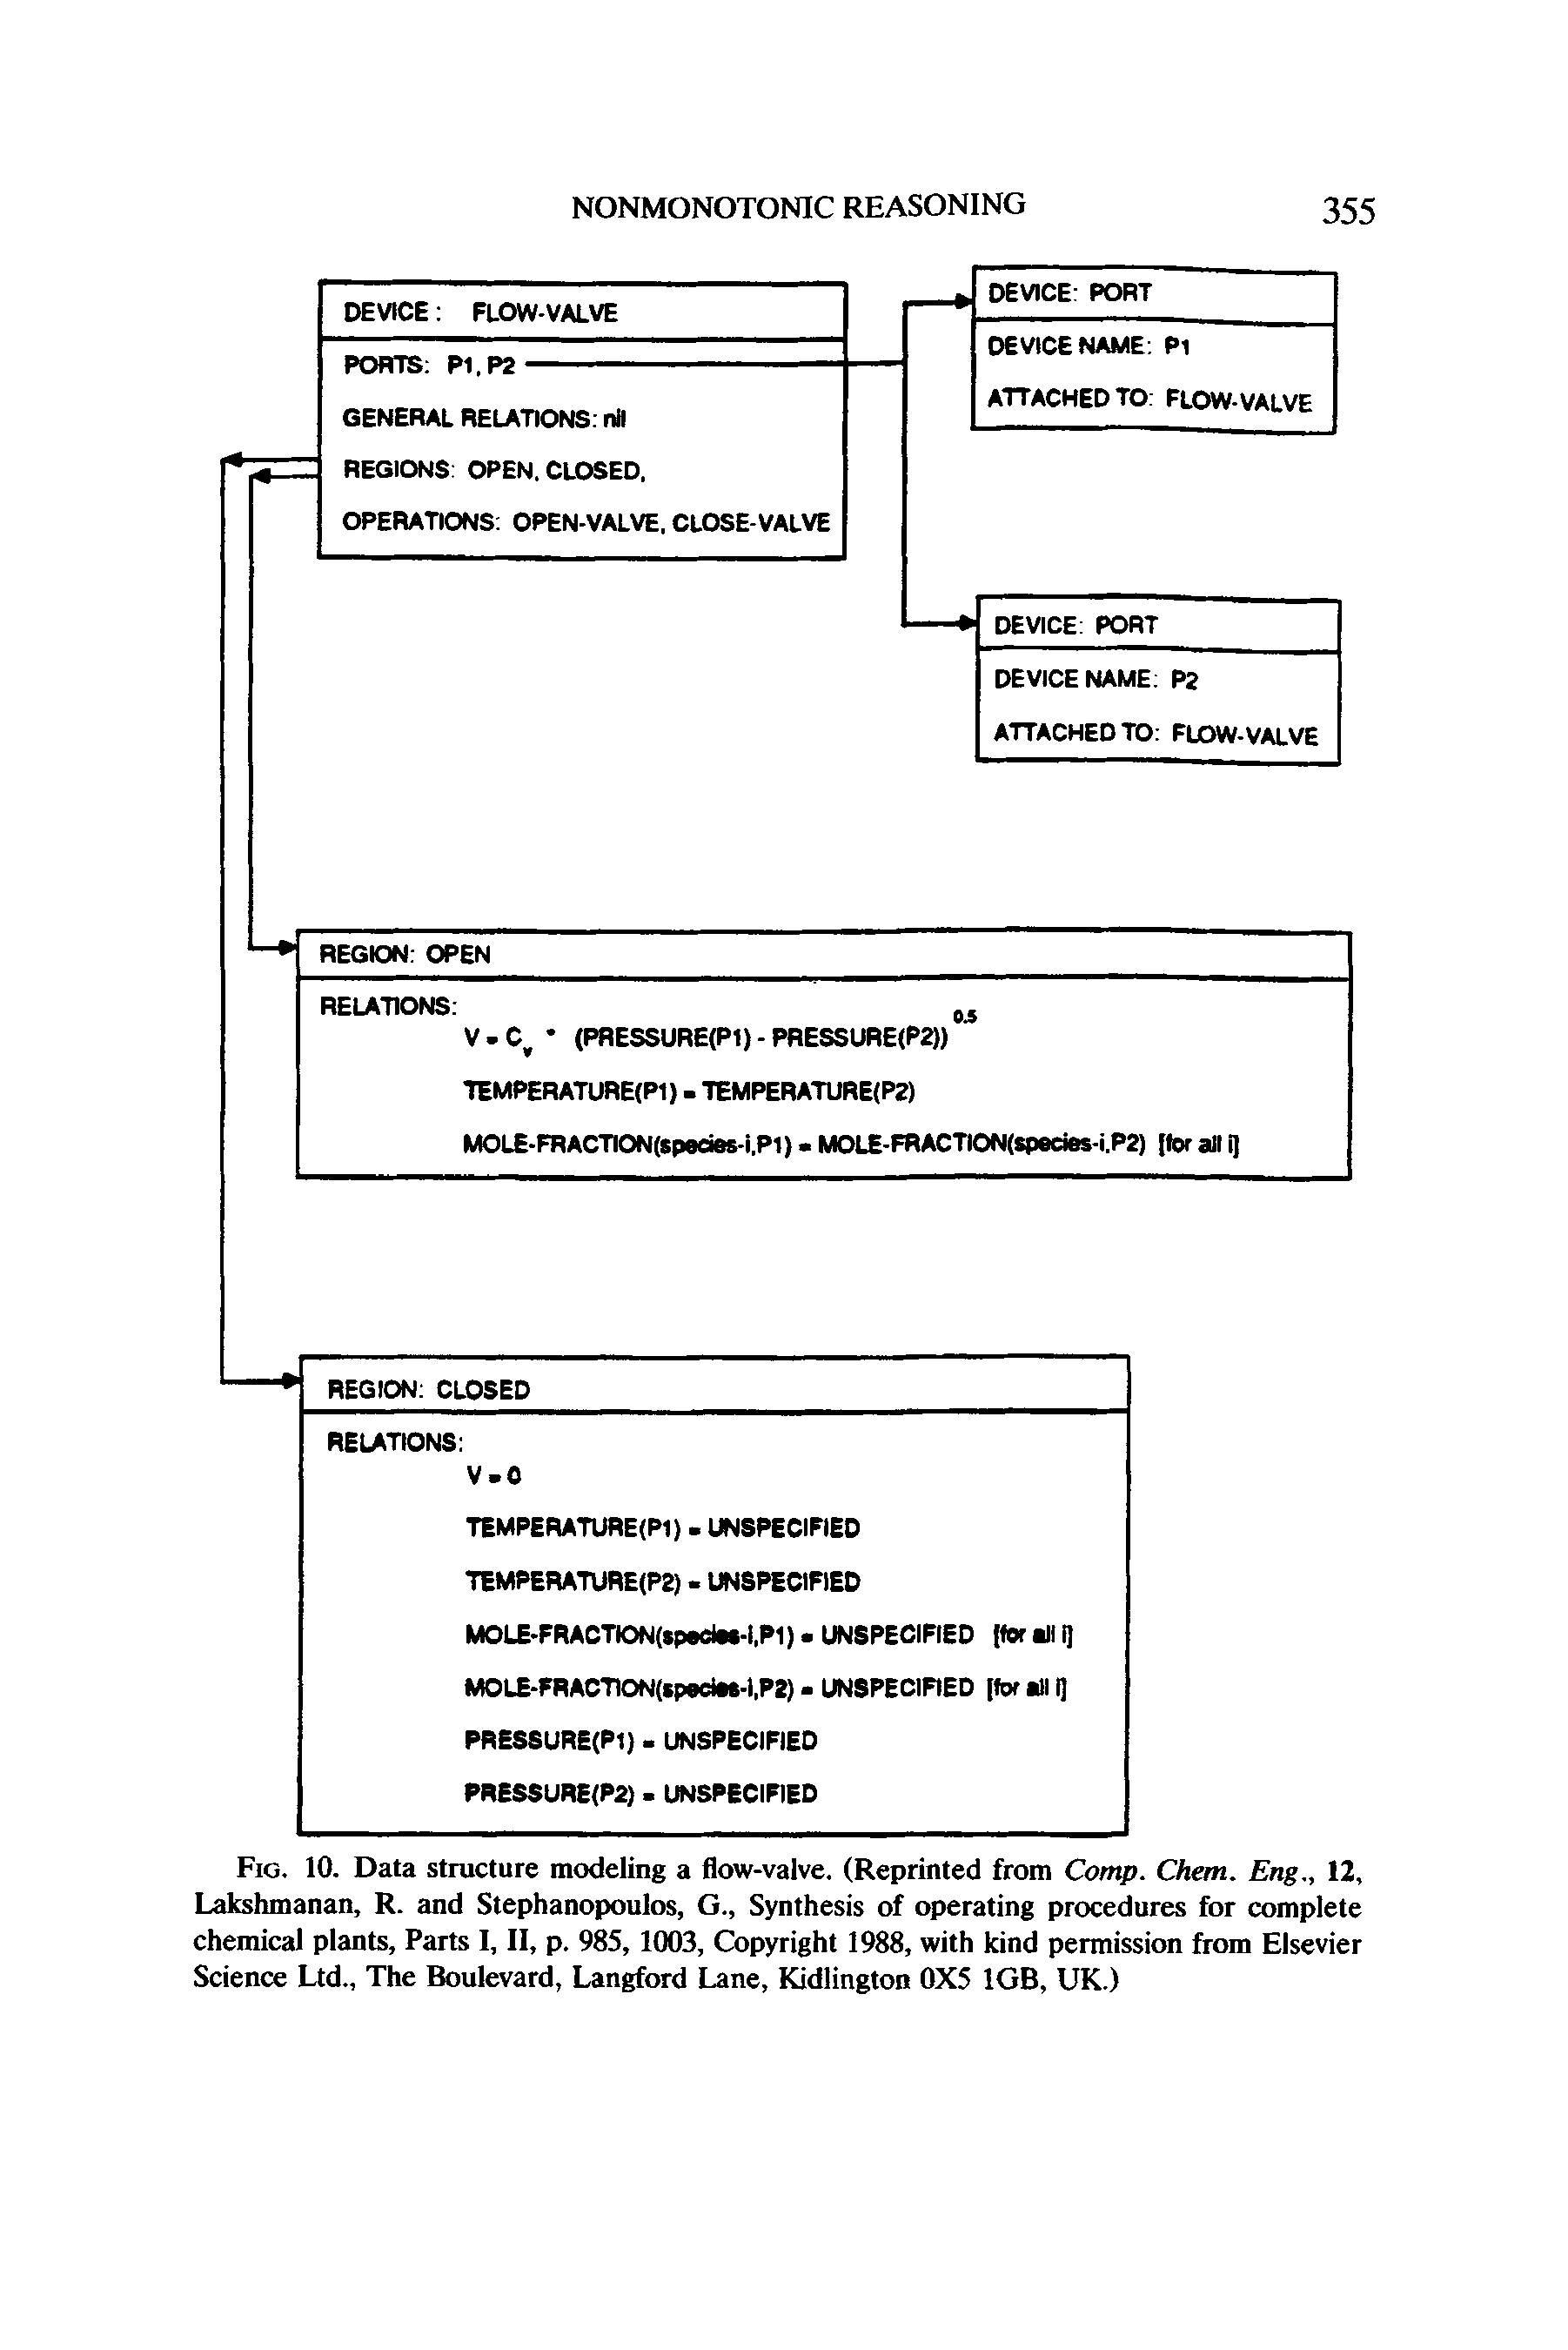 Fig. 10. Data structure modeling a flow-valve. (Reprinted from Comp. Chem. Eng., 12, Lakshmanan, R. and Stephanopoulos, G., Synthesis of operating procedures for complete chemical plants. Parts I, II, p. 985,1003, Copyright 1988, with kind permission from Elsevier Science Ltd., The Boulevard, Langford Lane, Kidlington 0X5 1GB, UK.)...